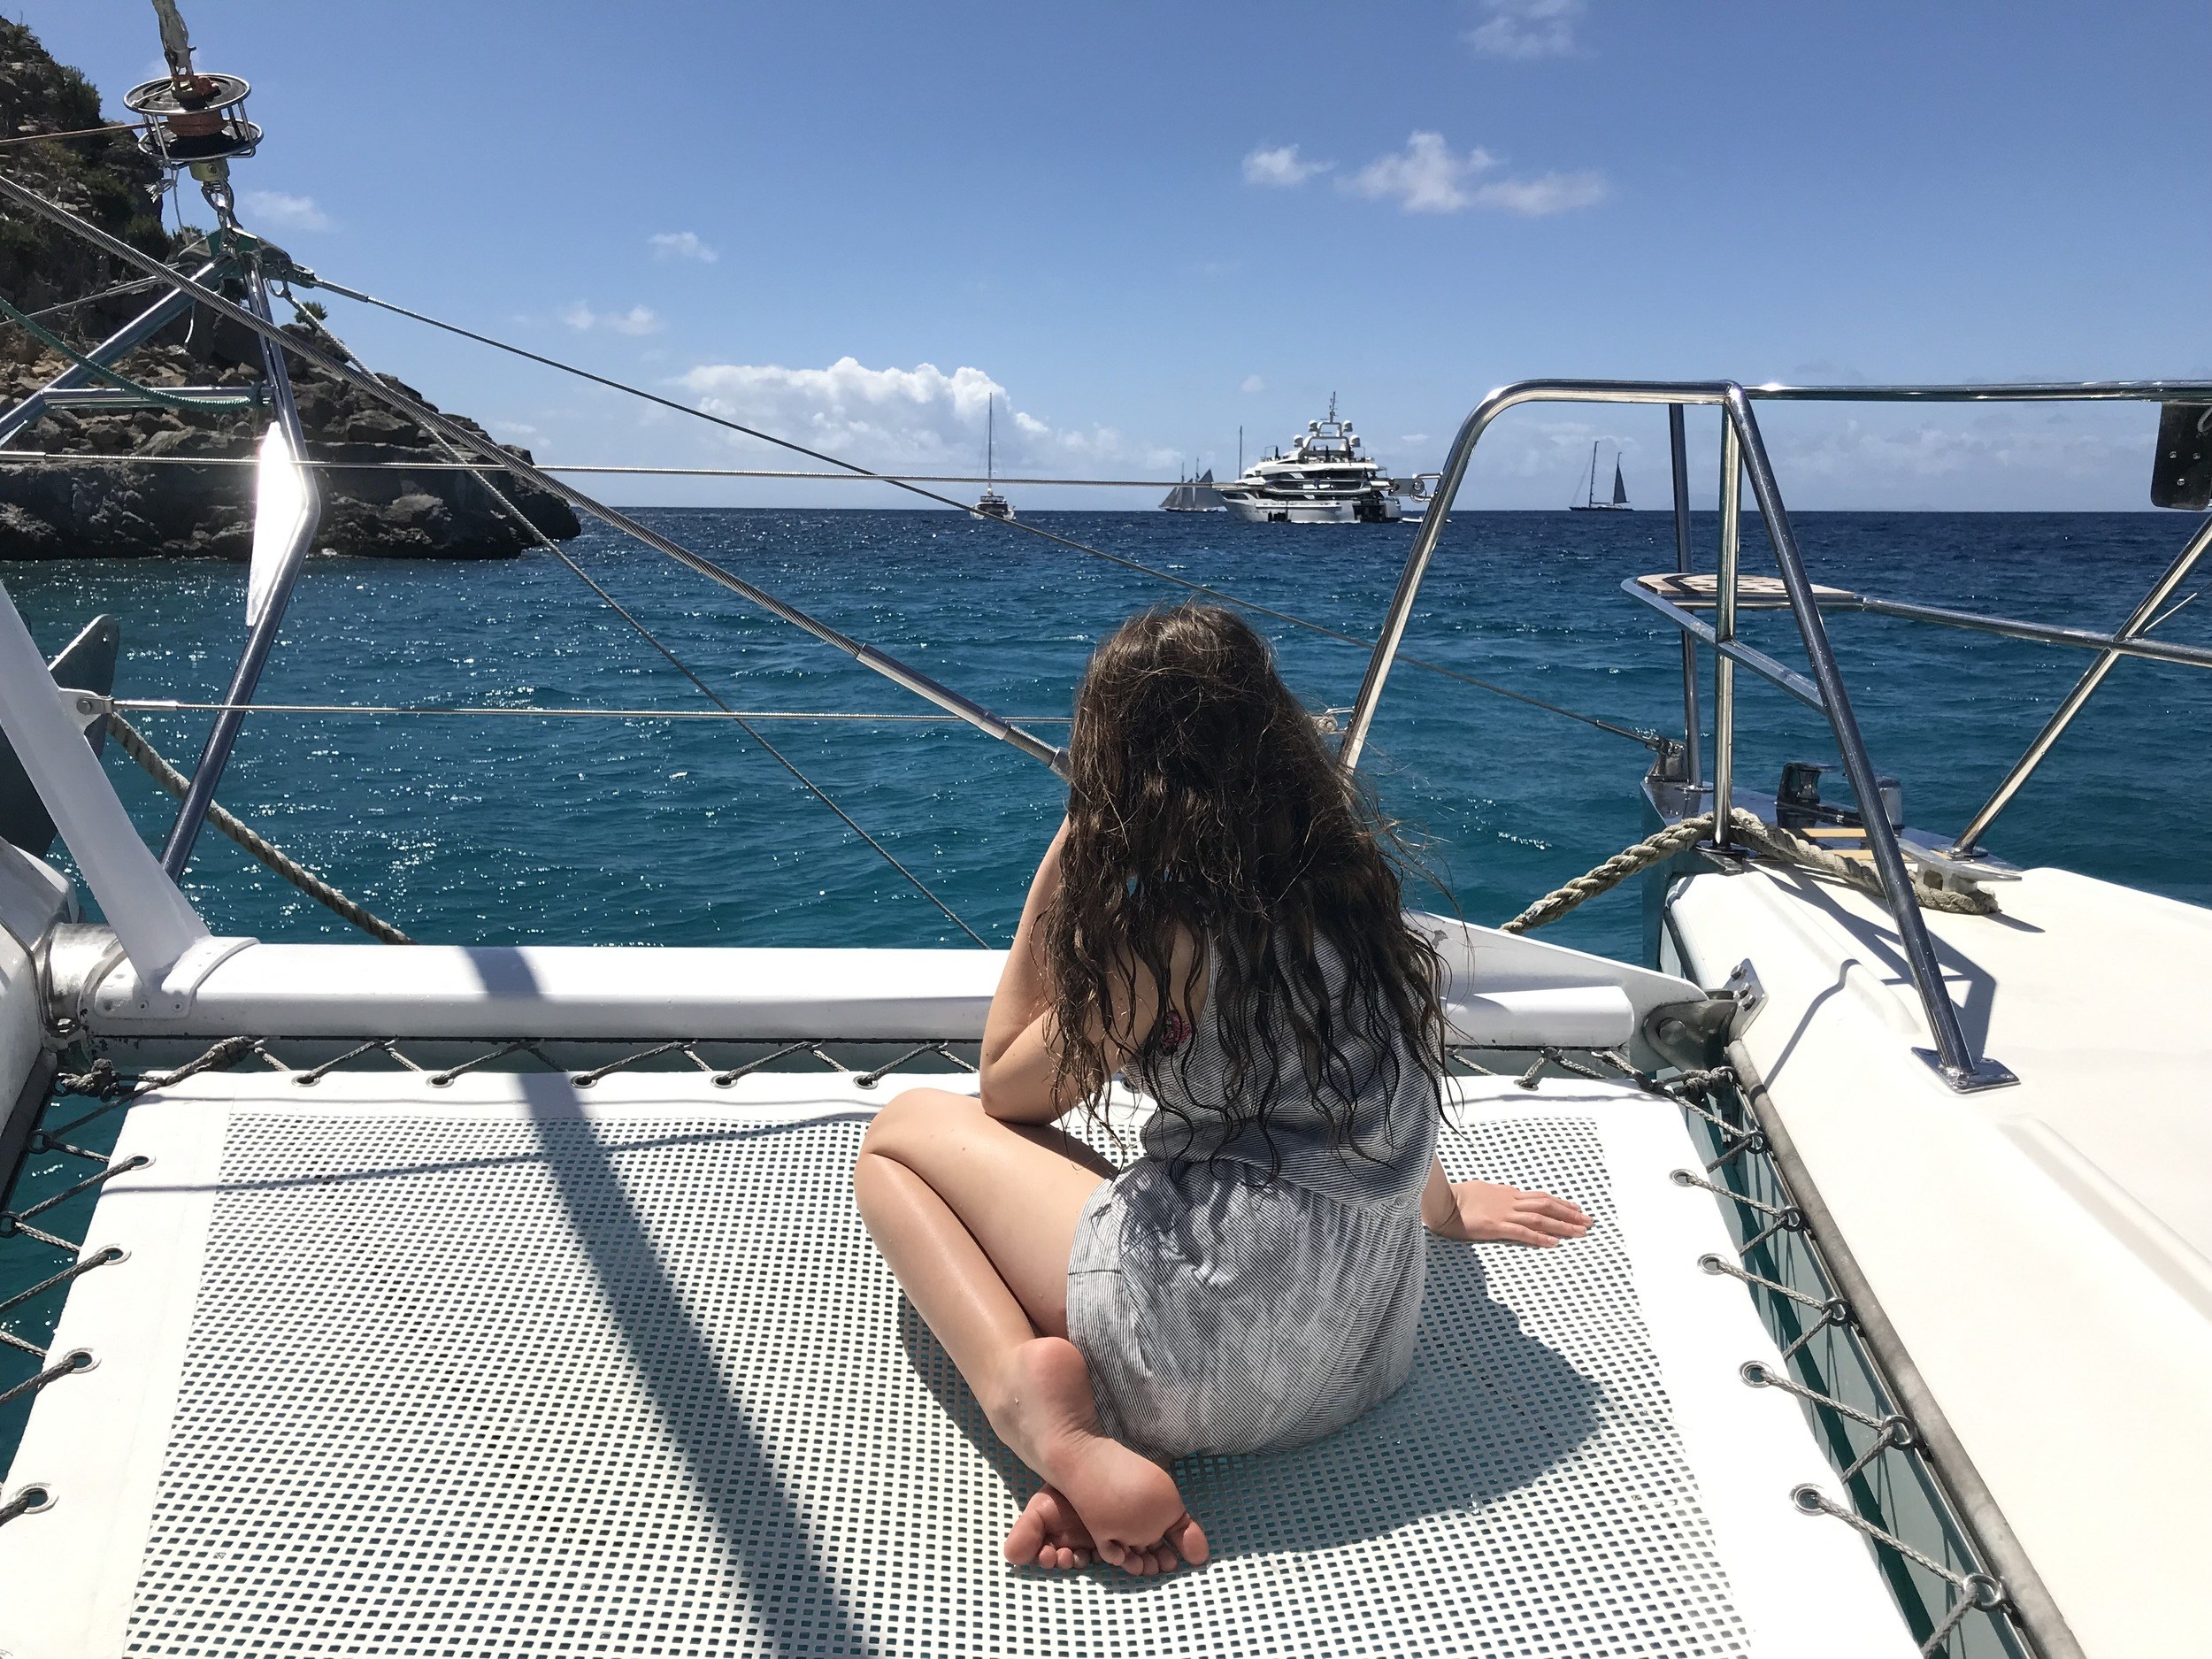 Activities For Adults in St. Barts – Yacht Vacations